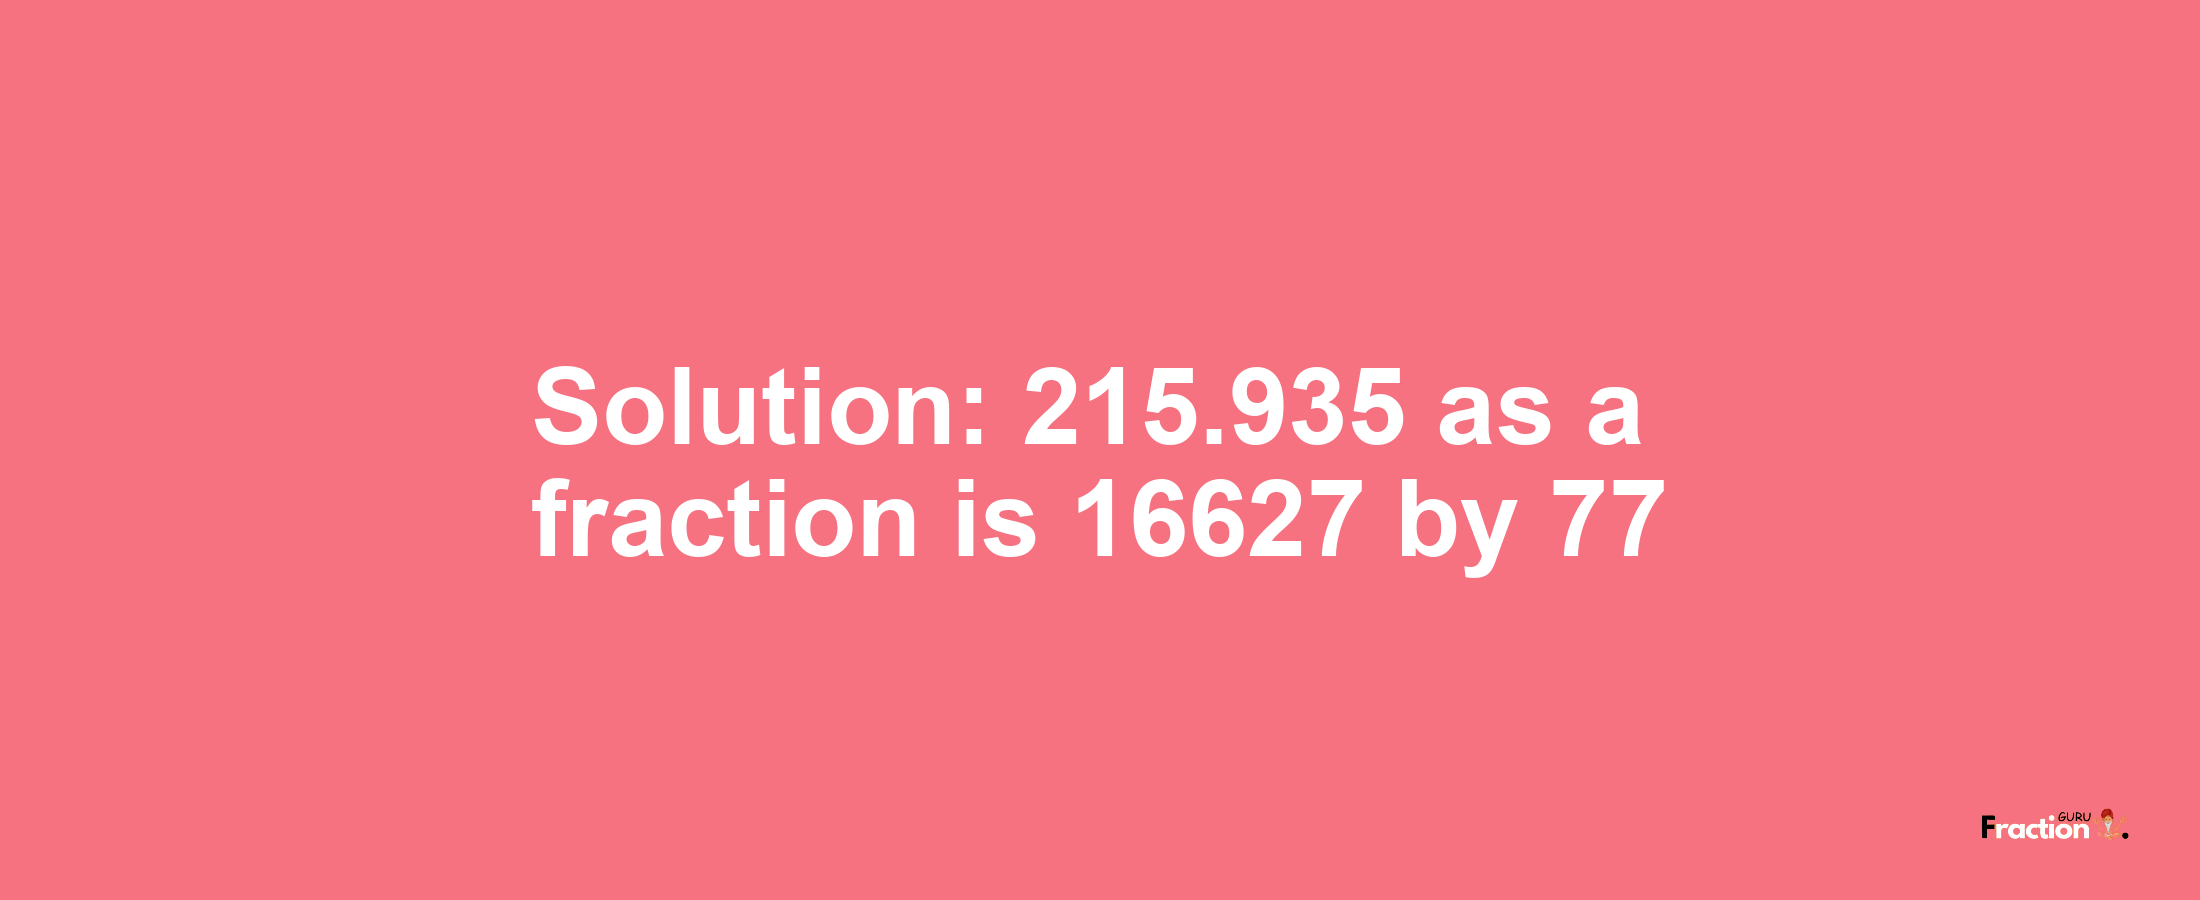 Solution:215.935 as a fraction is 16627/77